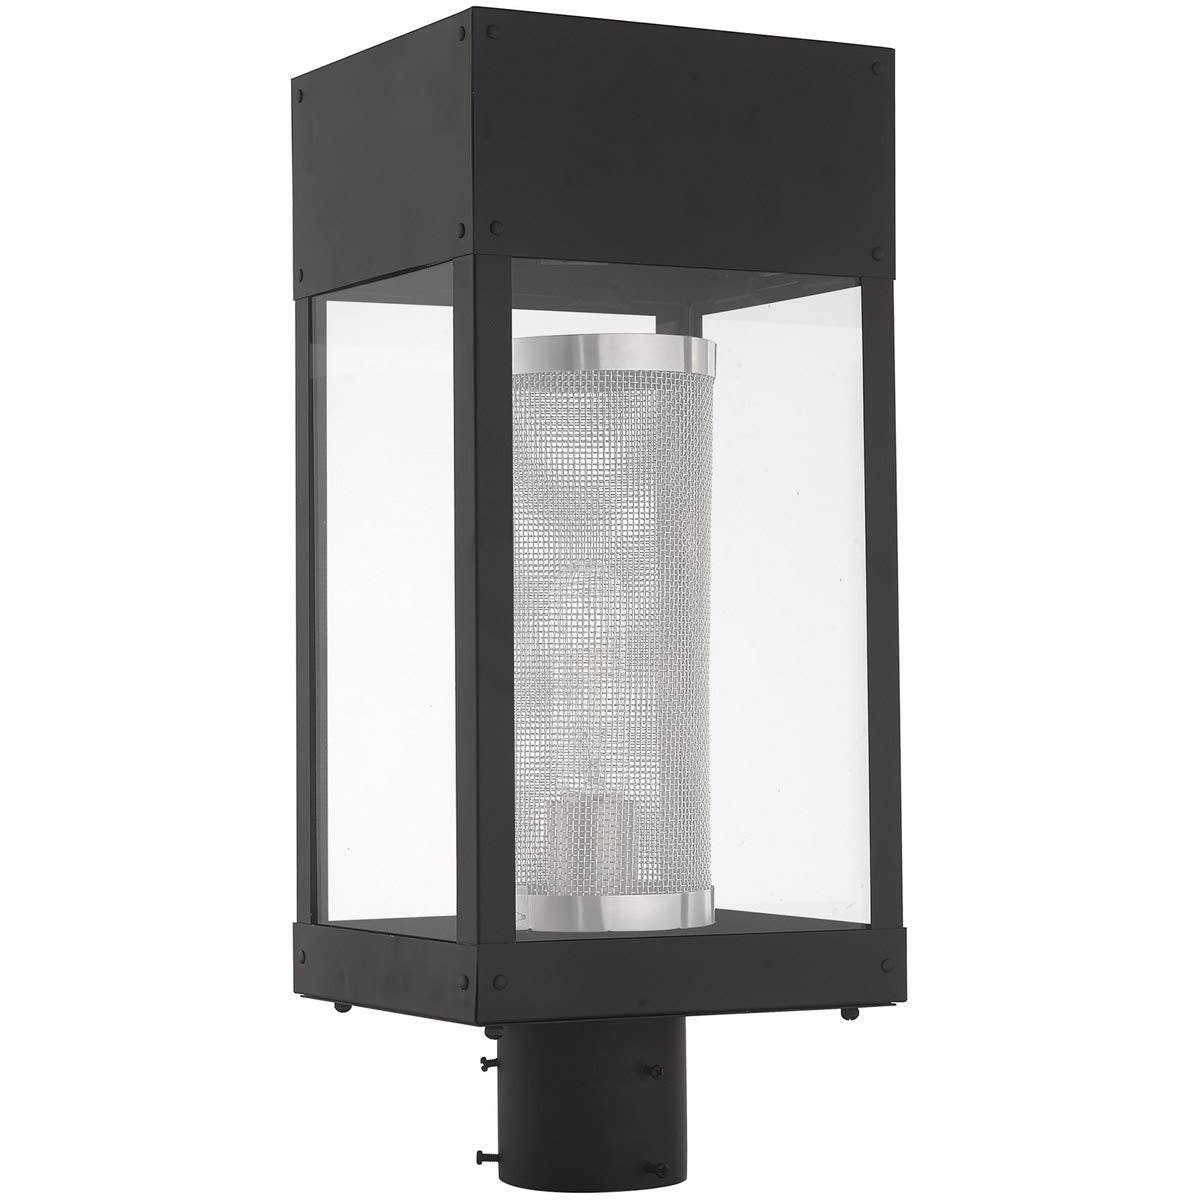 Livex Lighting 20763-04 Franklin - One Light Outdoor Post Top Lantern, Black Finish with Clear Glass with Stainless Steel Mesh Shade